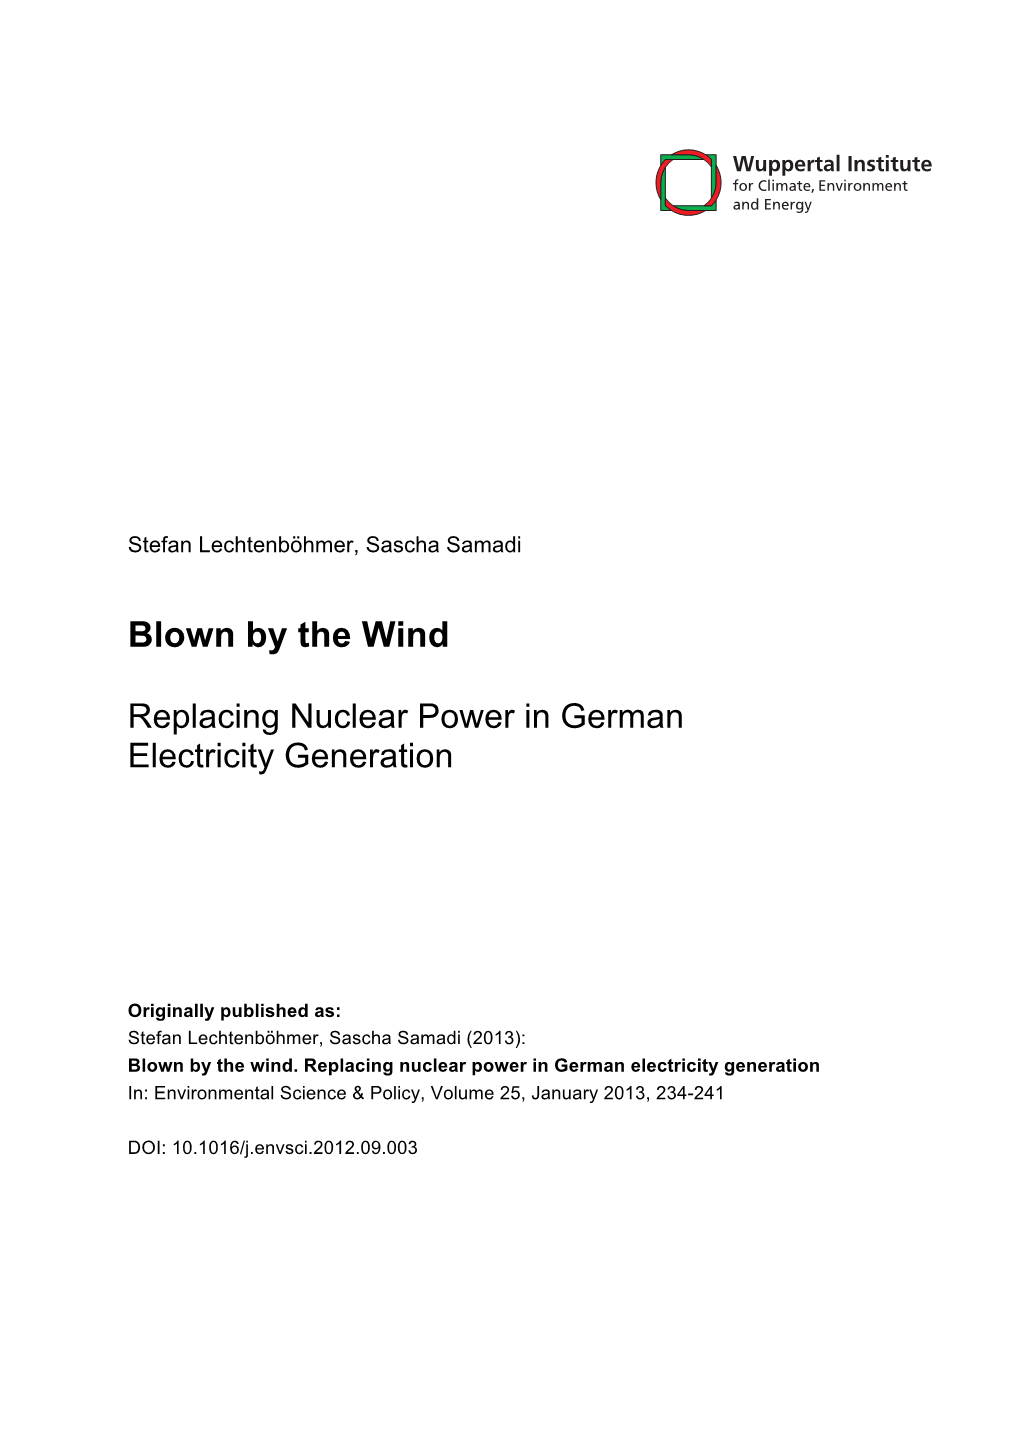 Replacing Nuclear Power in German Electricity Generation